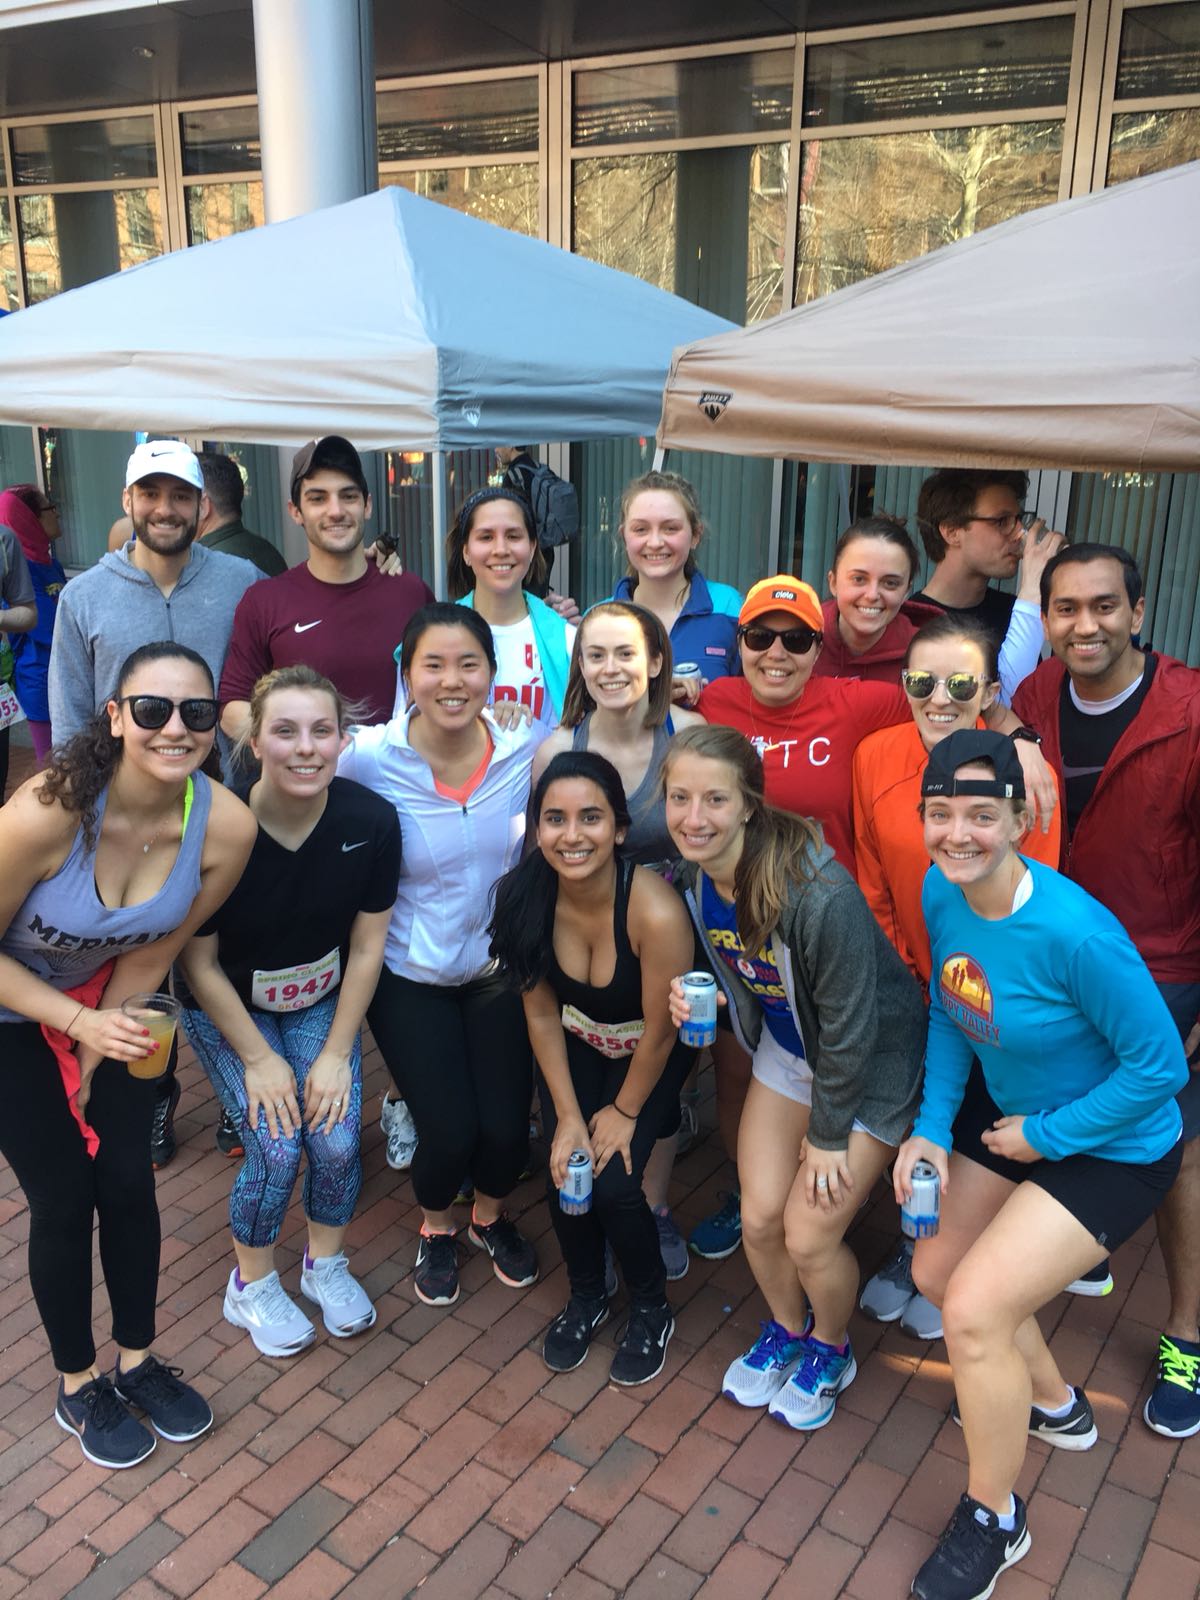 photo of students in workout gear at 5k event